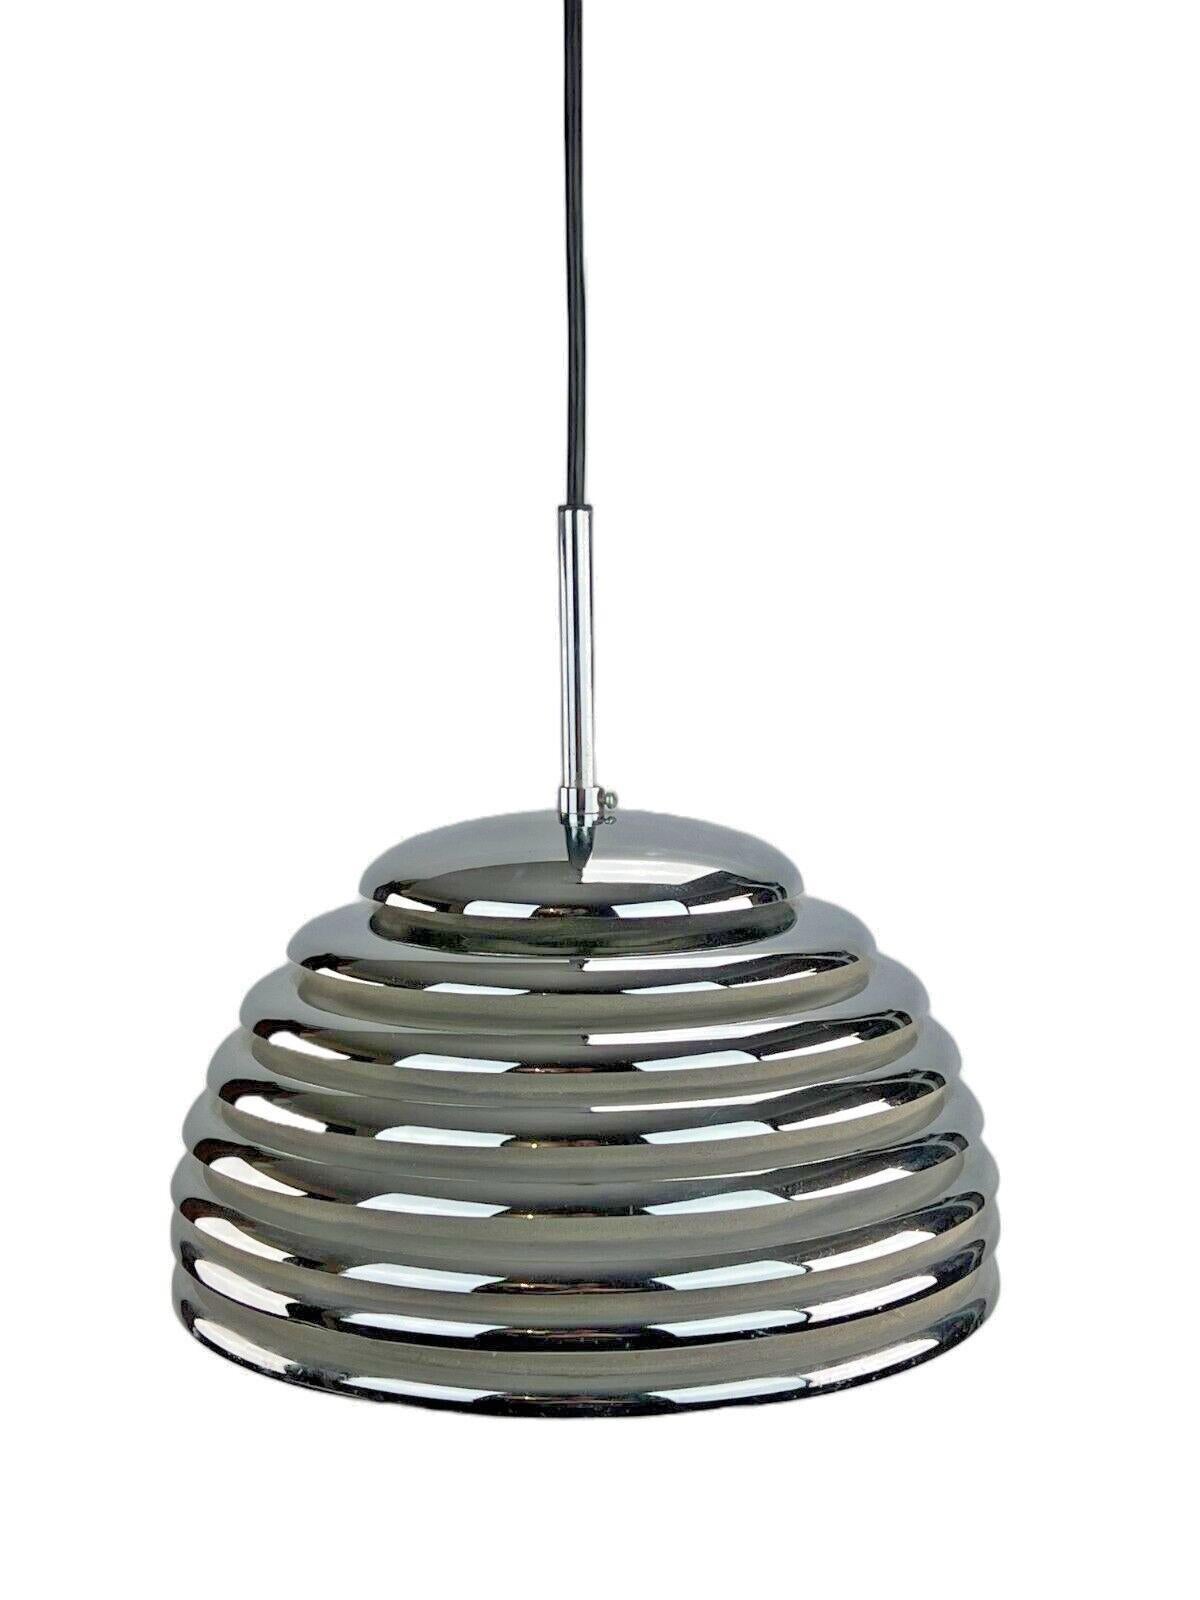 60s 70s ceiling lamp staff lights Kazuo Motozawa Saturno chrome design.

Object: Ceiling lamp

Manufacturer: Staff lights

Condition: Good

Age: Around 1960-1970

Dimensions:

Diameter = 30cm
Height = 28.5cm

Other notes:

E27